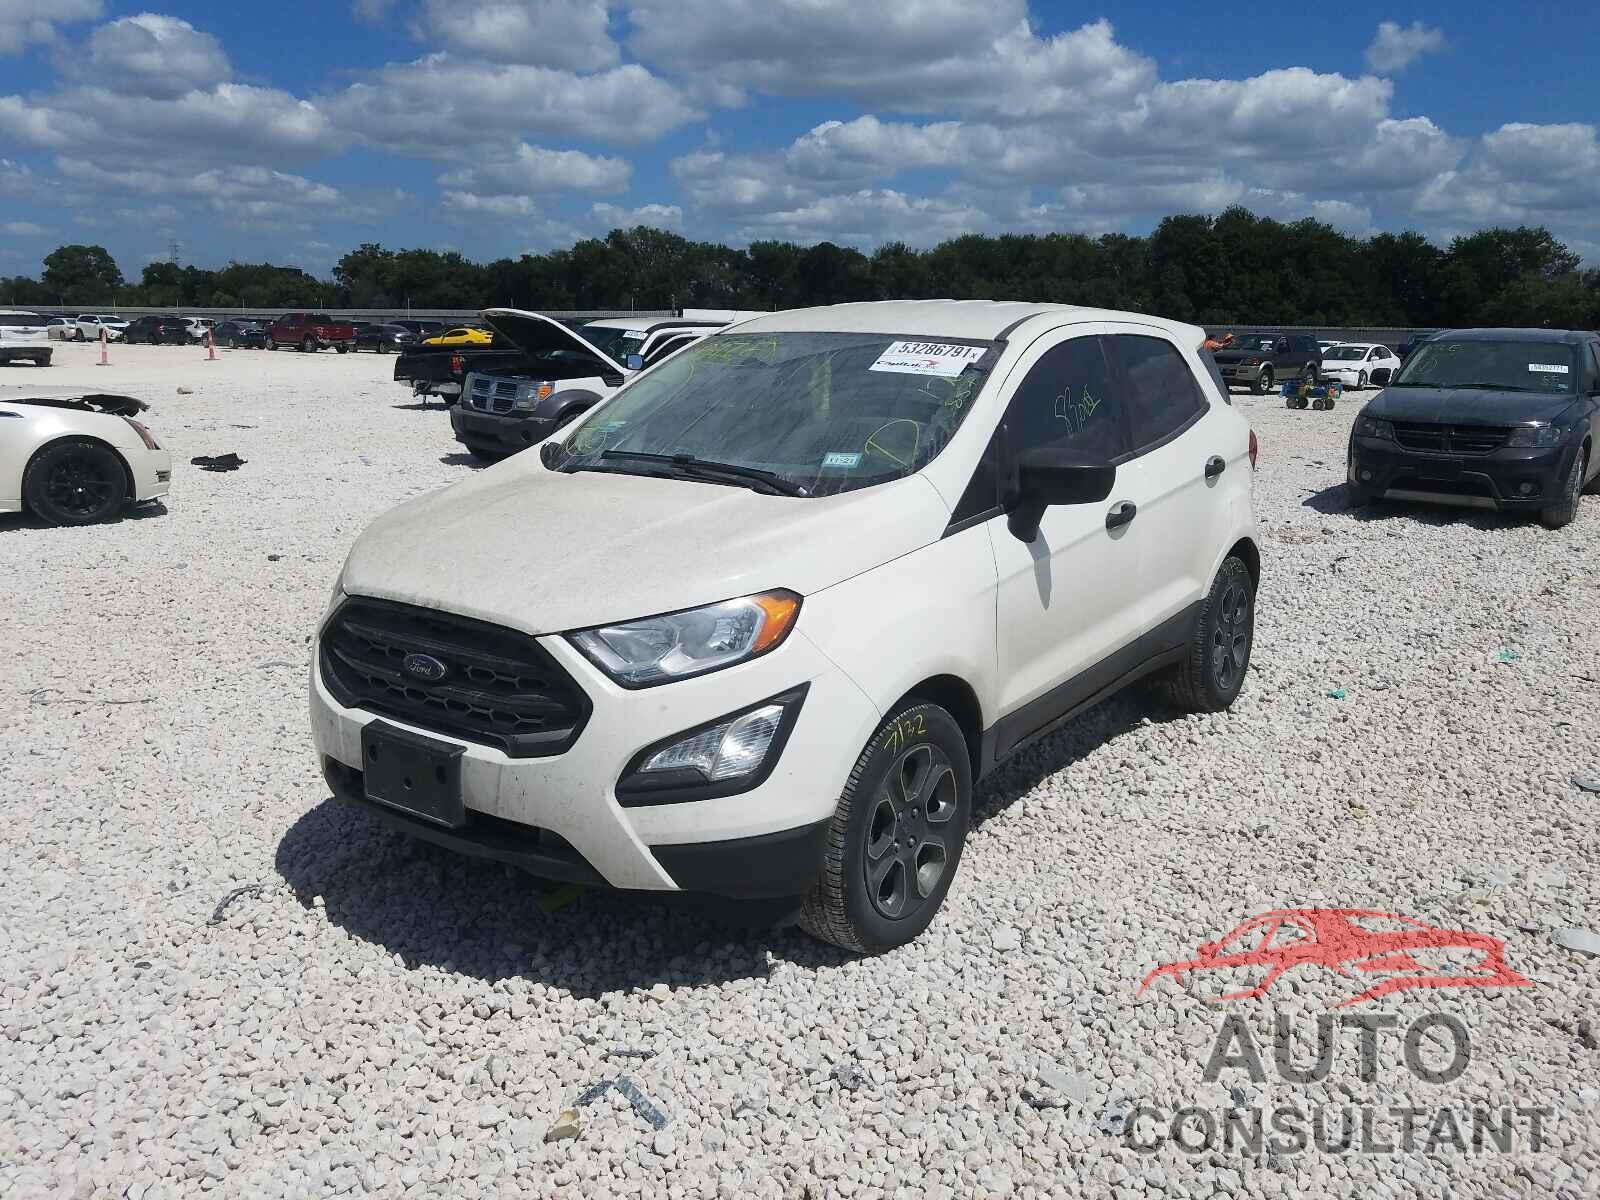 FORD ALL OTHER 2018 - MAJ3P1RE0JC176887